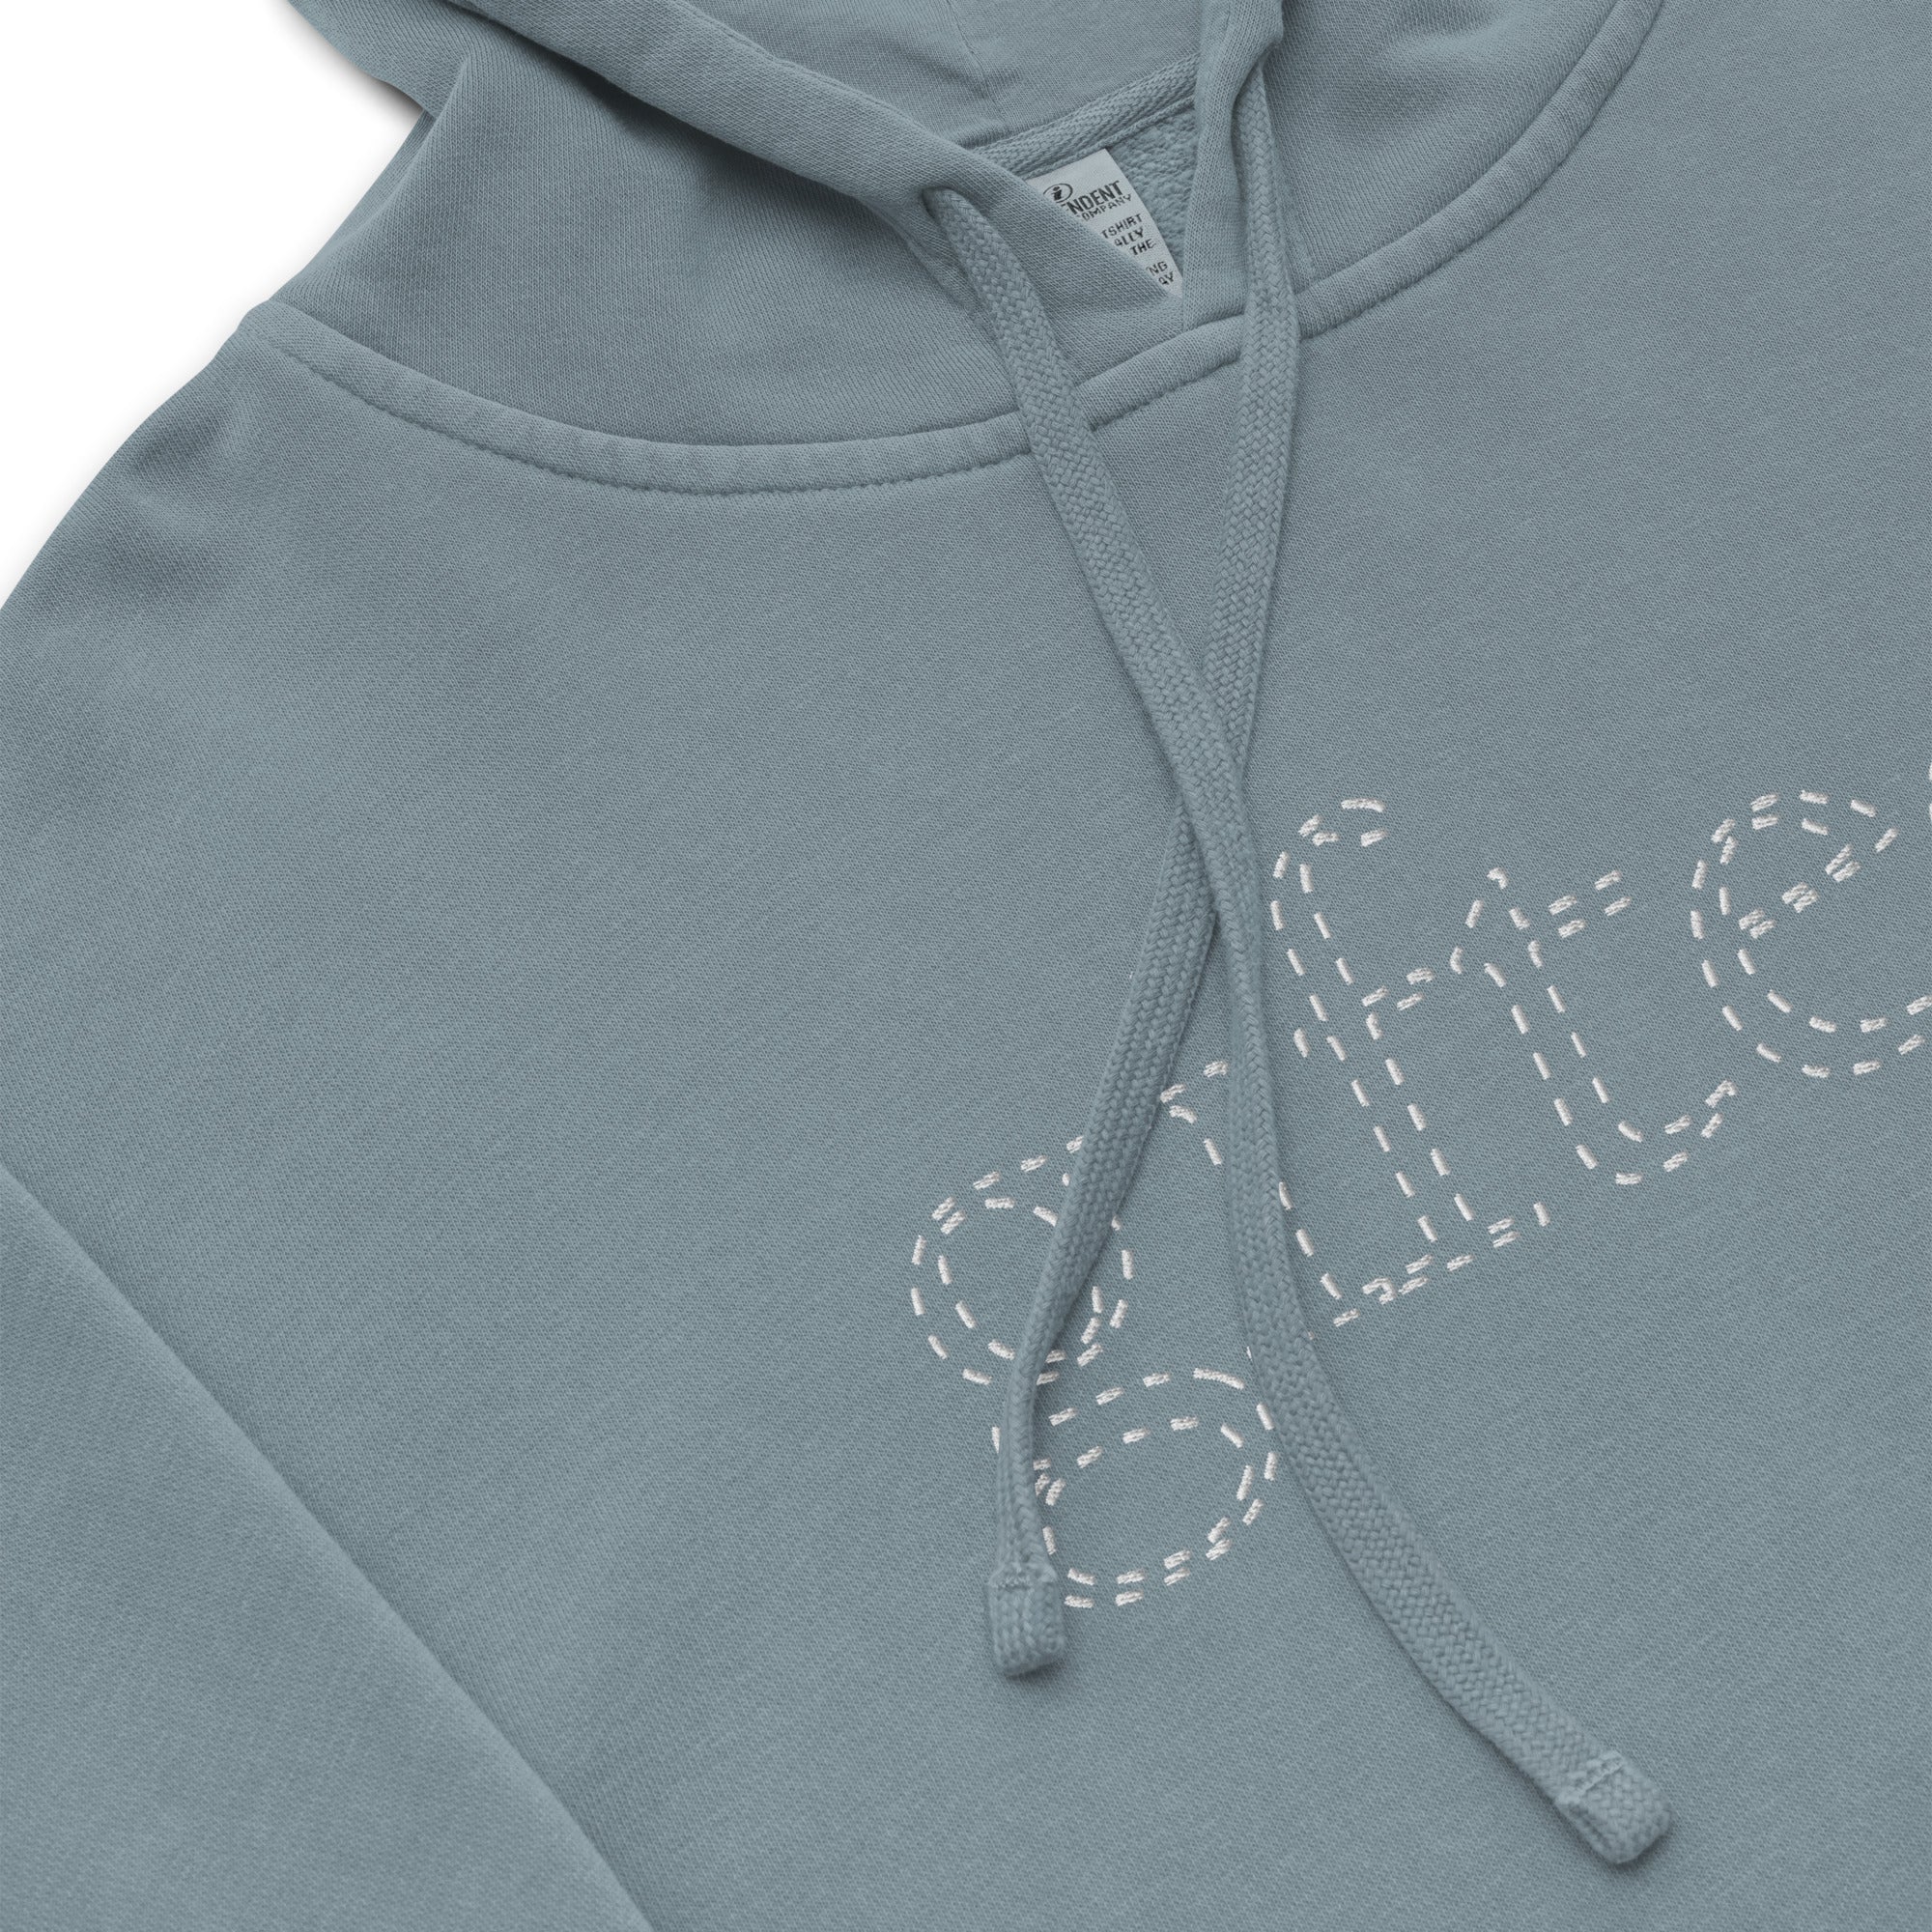 Embroidered Gifted Pigment-Dyed Hoodie